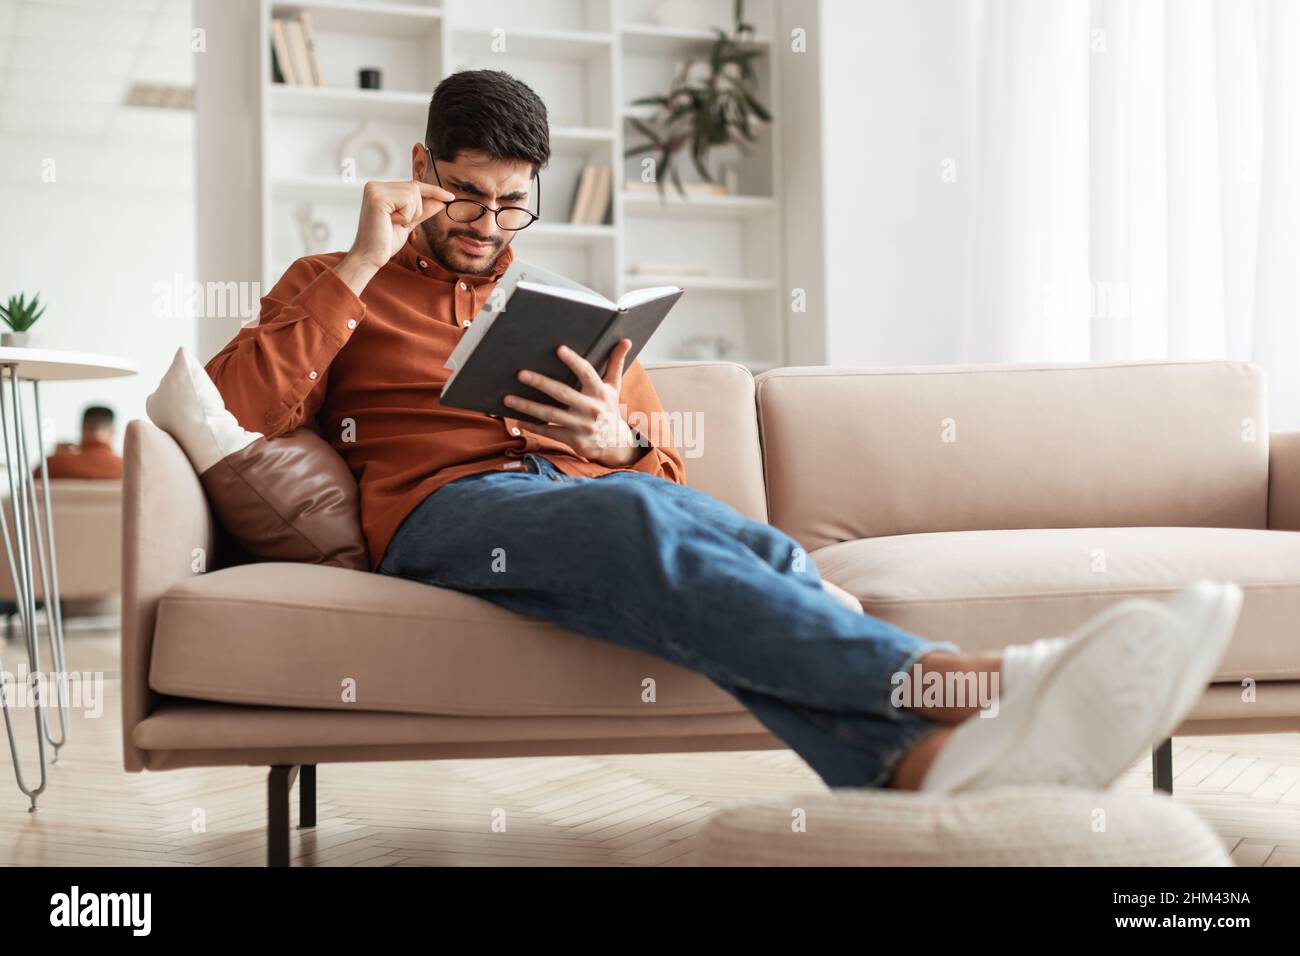 Focused Arab man in glasses trying to read book Stock Photo